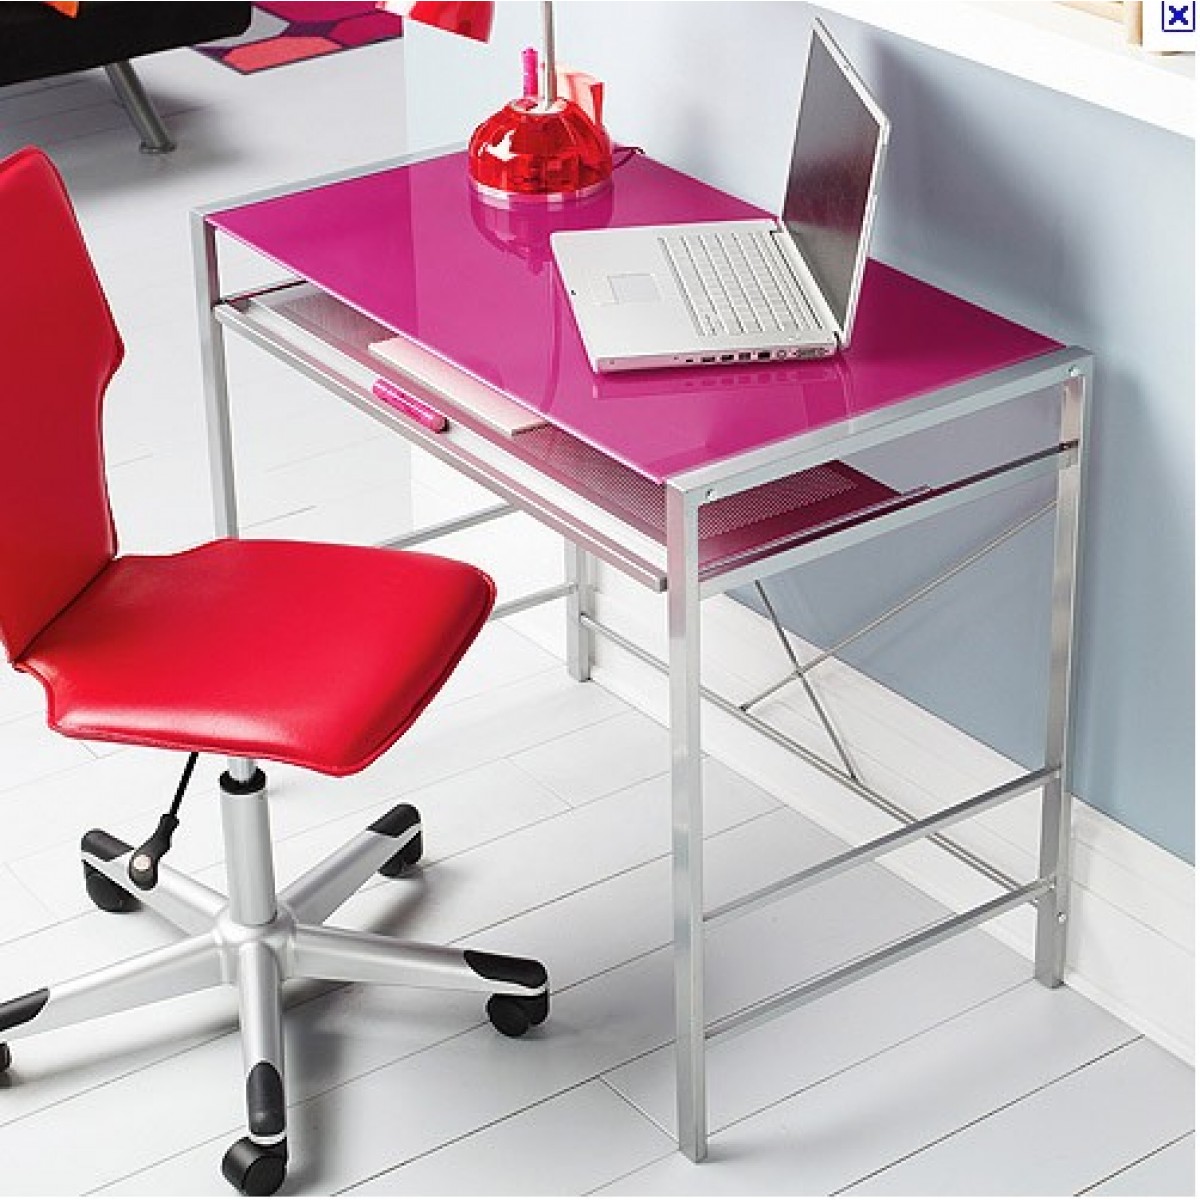 Double Star Furniture Neo Pink Computer Desk Double Star